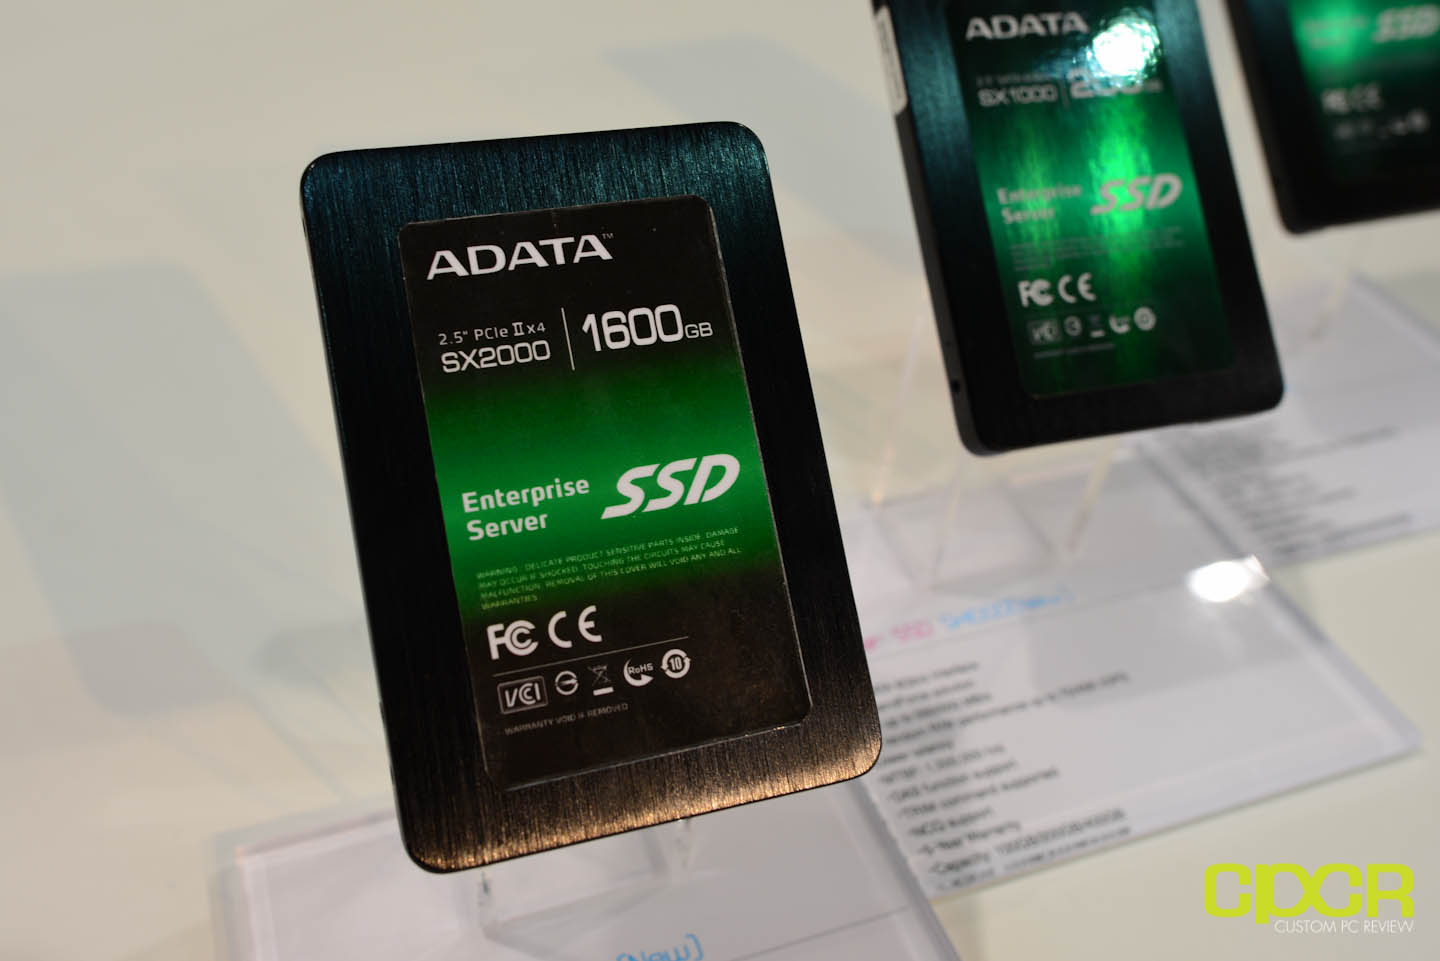 ADATA Shows Off SX2000 SSD: 1.6TB Capacity, 1.8 GB/s Transfer Rate